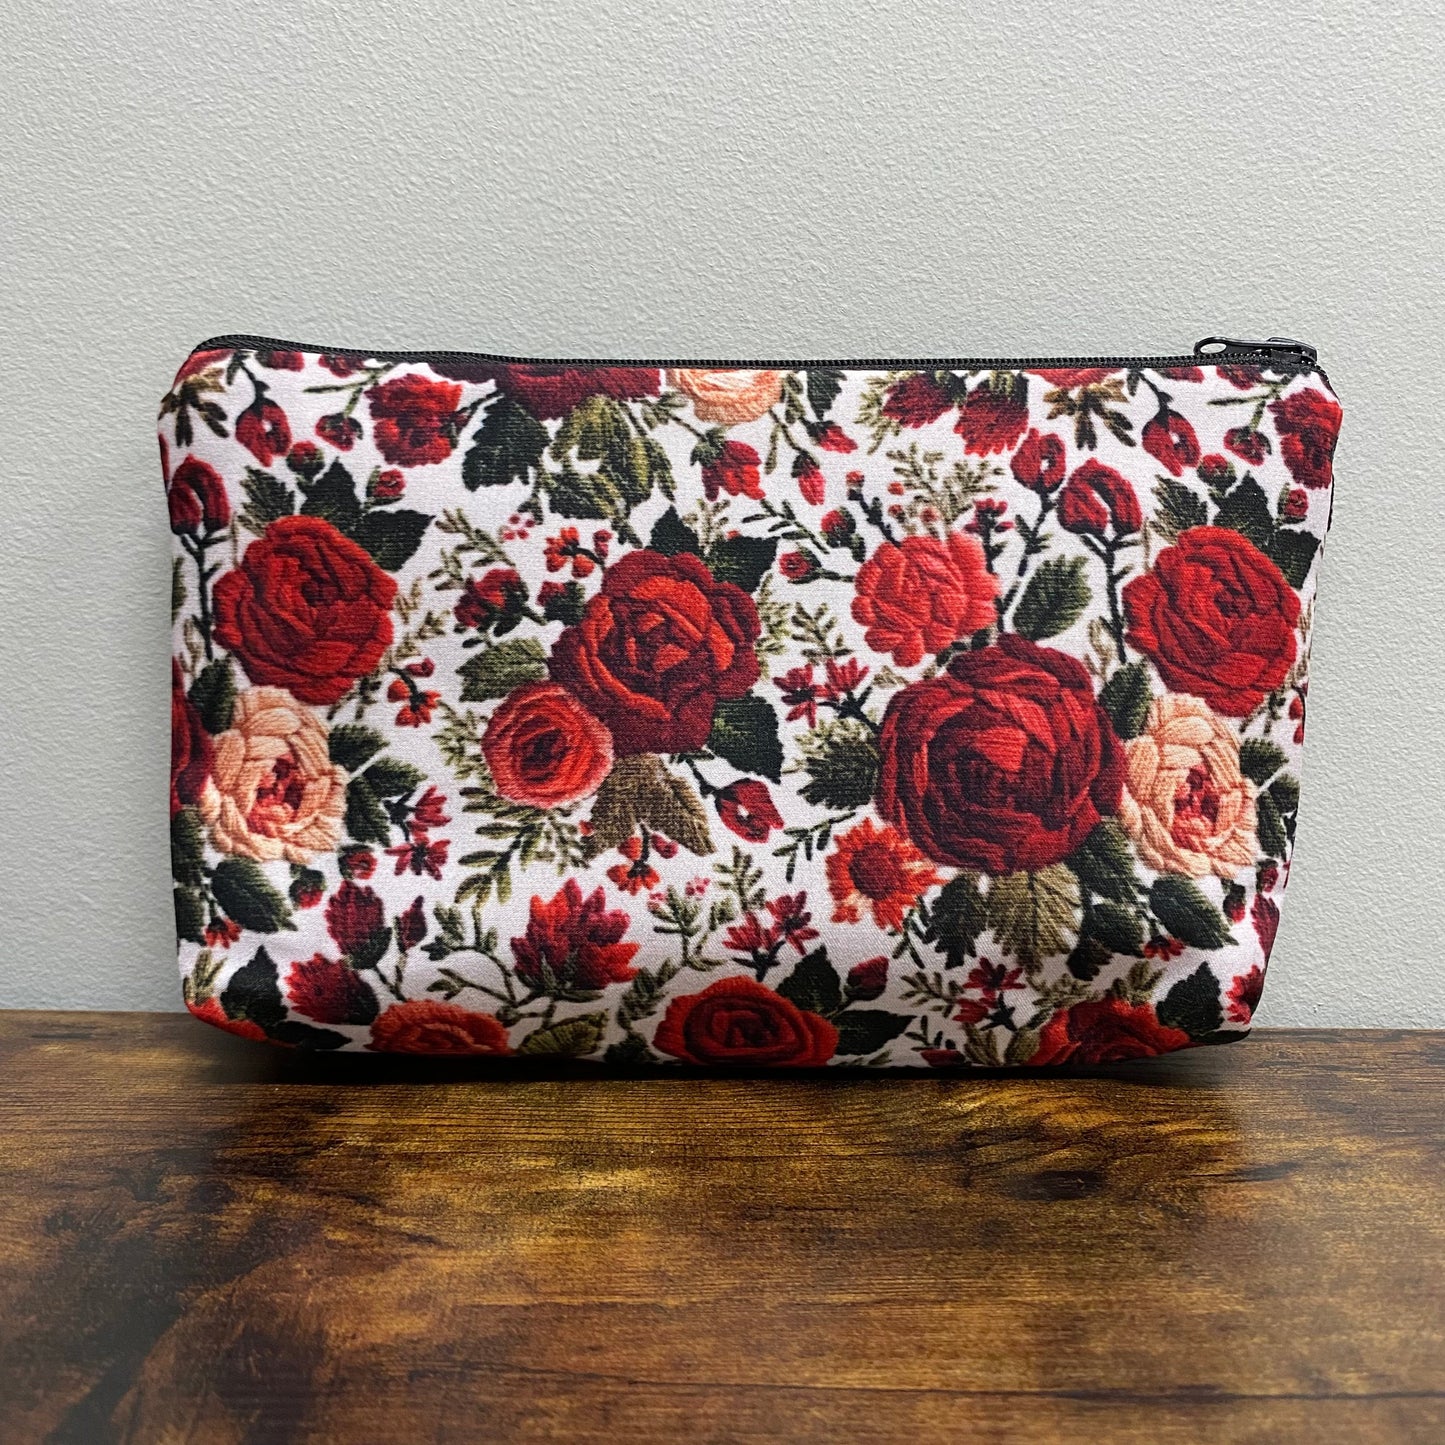 Pouch - Floral, Rose Embroidery